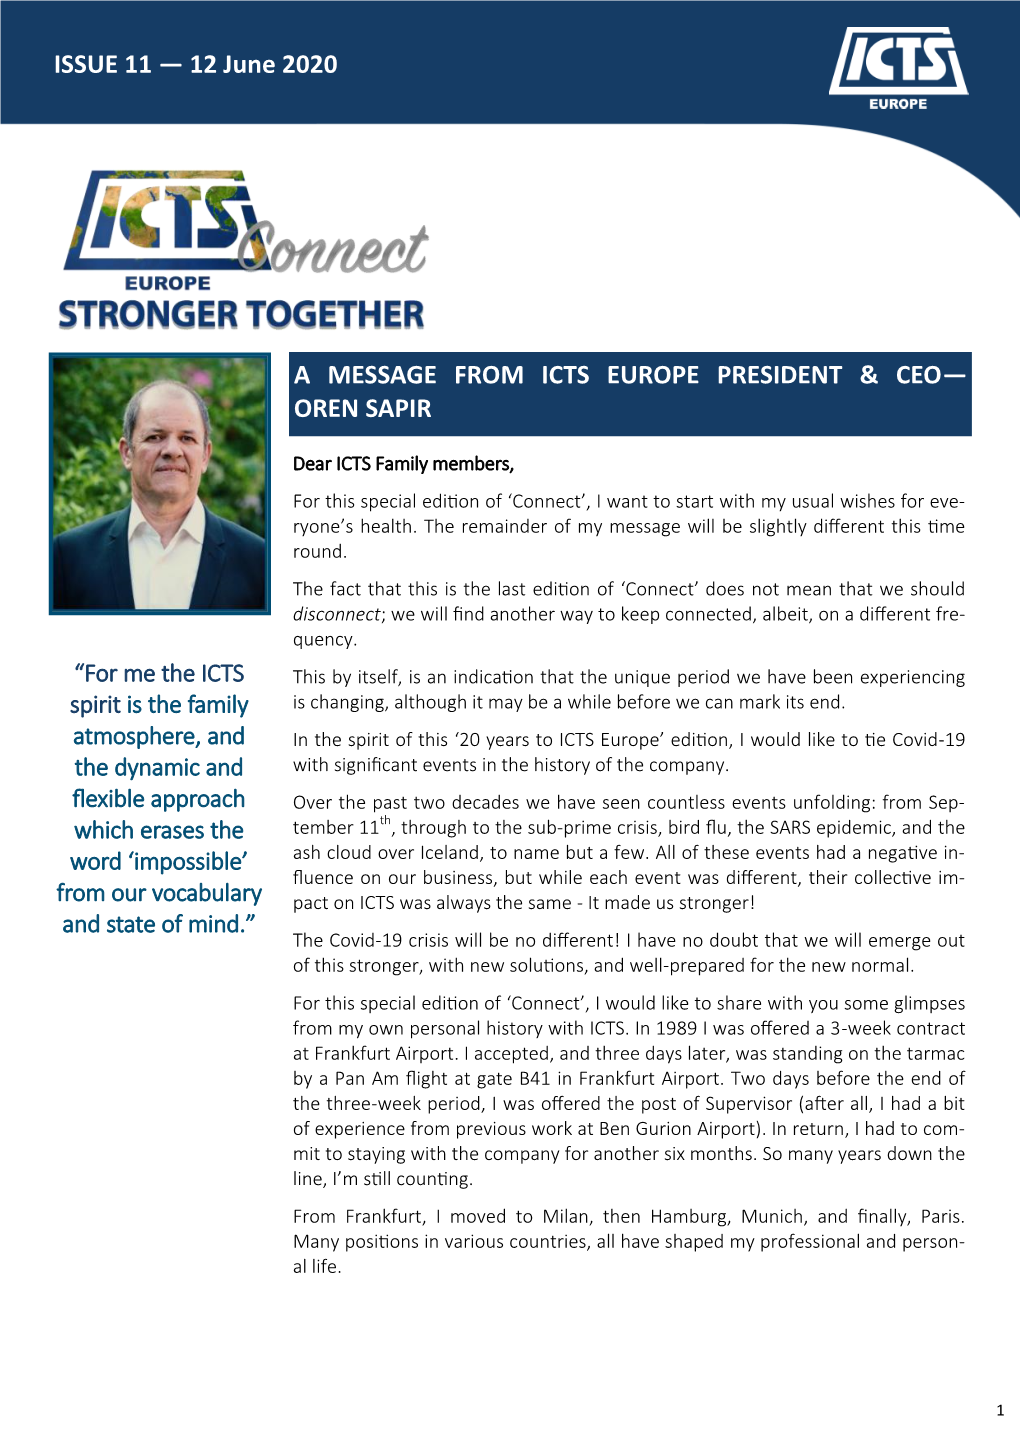 A Message from Icts Europe President & Ceo— Oren Sapir